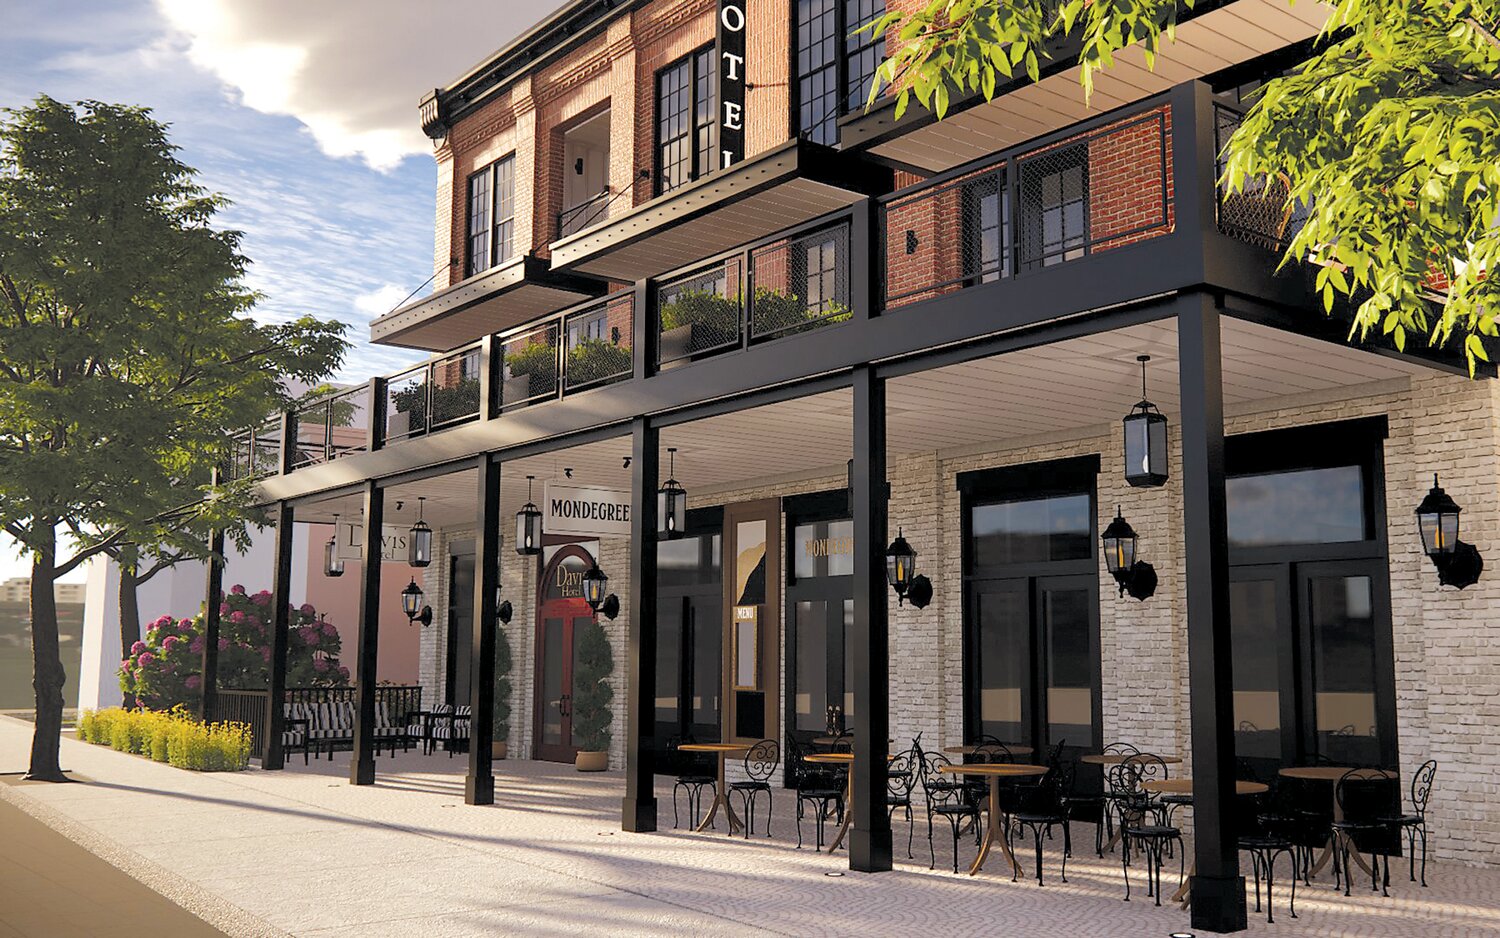 A rendering of the proposed “boutique” hotel and restaurant at the site of the former Doylestown Borough Hall on West Court Street.